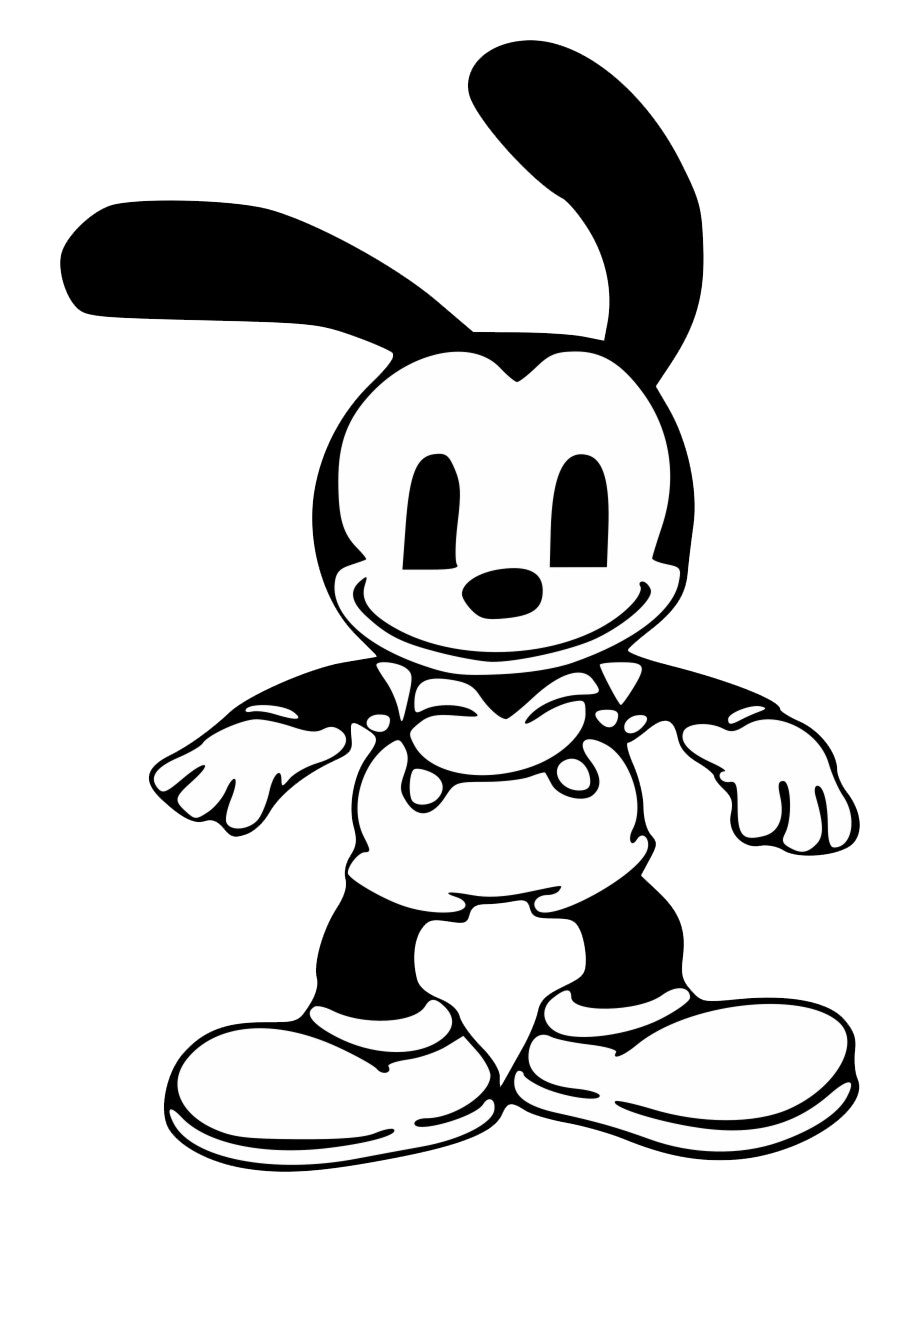 Oswald The Lucky Rabbit PNG Pic